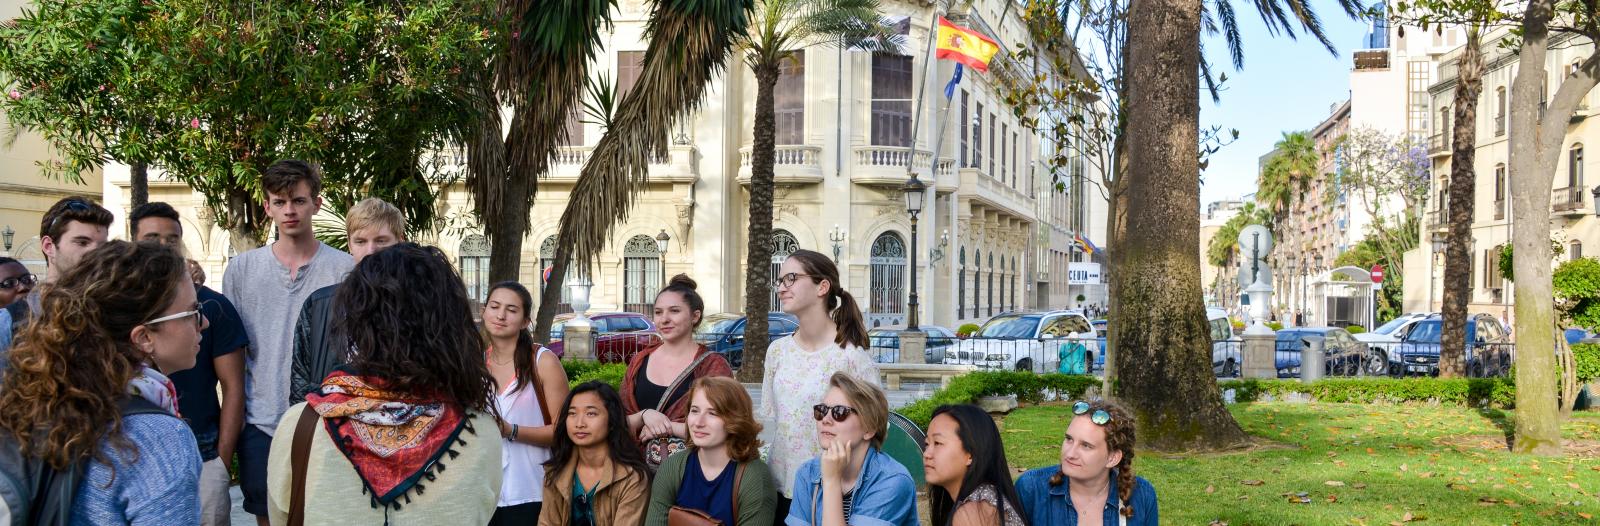 Global Learning Program visits with non-governmental organization in Ceuta, Spain